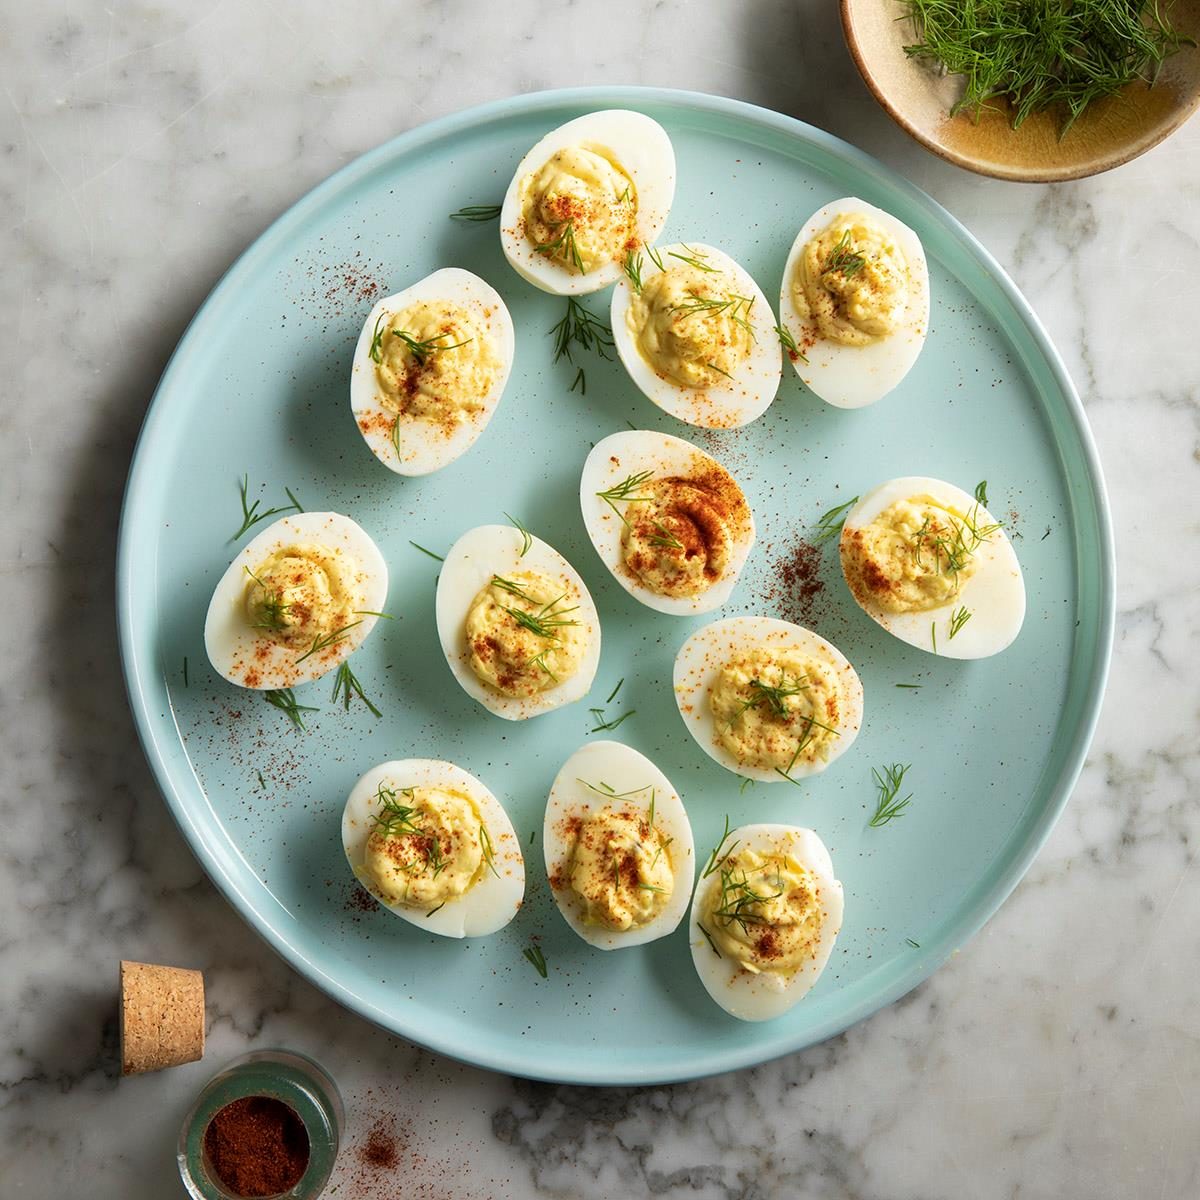 Southern Deviled Eggs Exps Ft22 270251 St 09 14 1